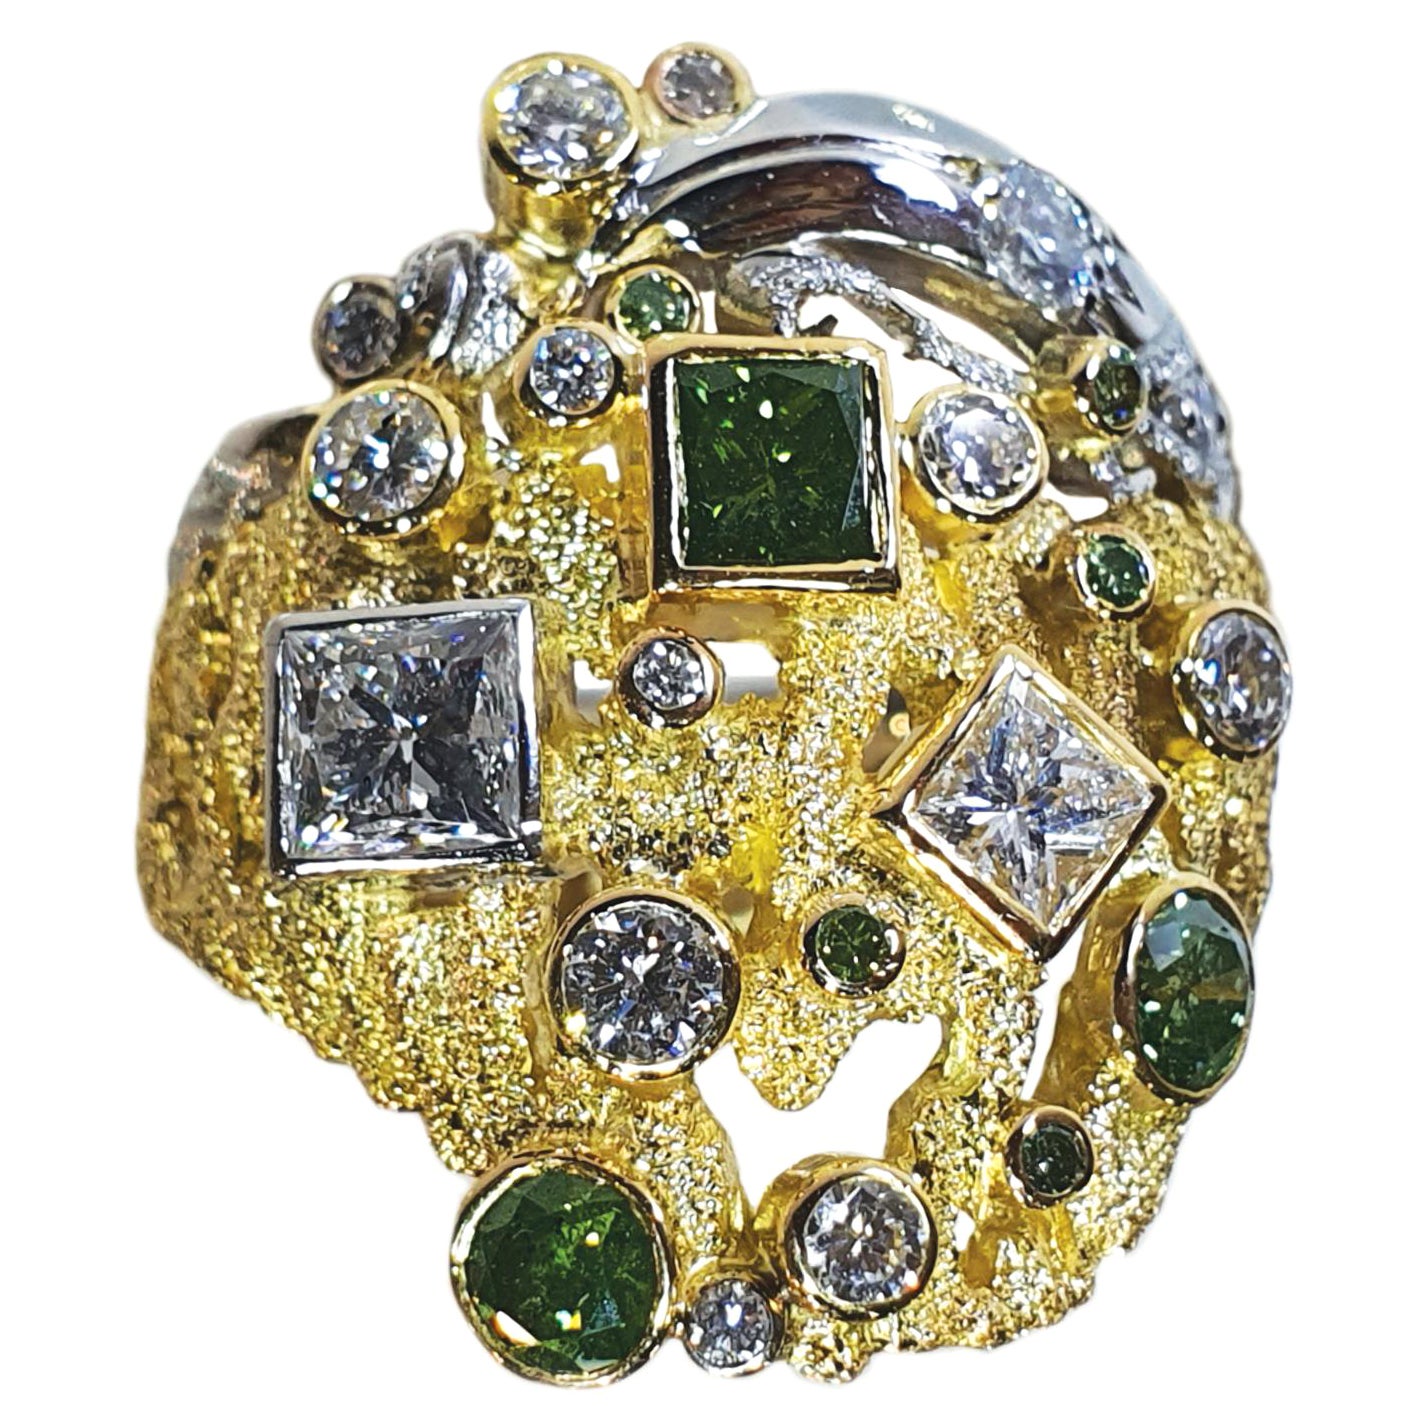 Paul Amey 18K Gold, Platinum, Green and White Diamond hand crafted "Bark" Ring For Sale